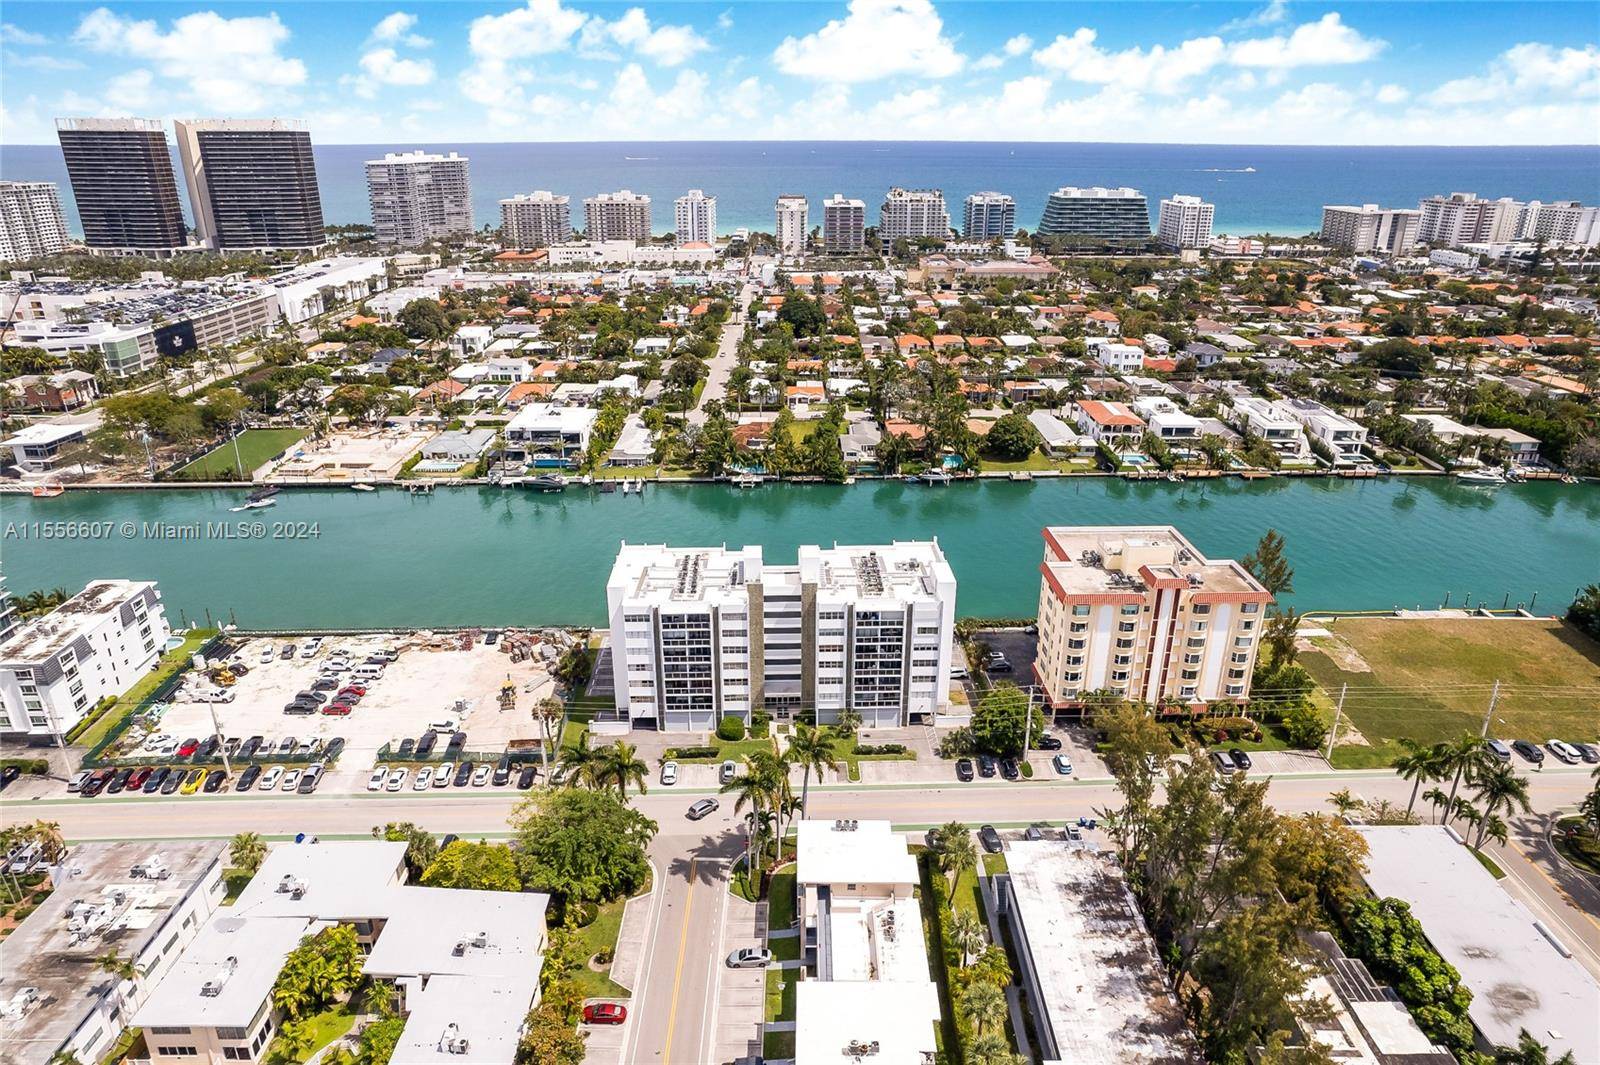 Experience breathtaking water views from the expansive balcony of this renovated London Towers condo, nestled in picturesque Bay Harbor Islands.